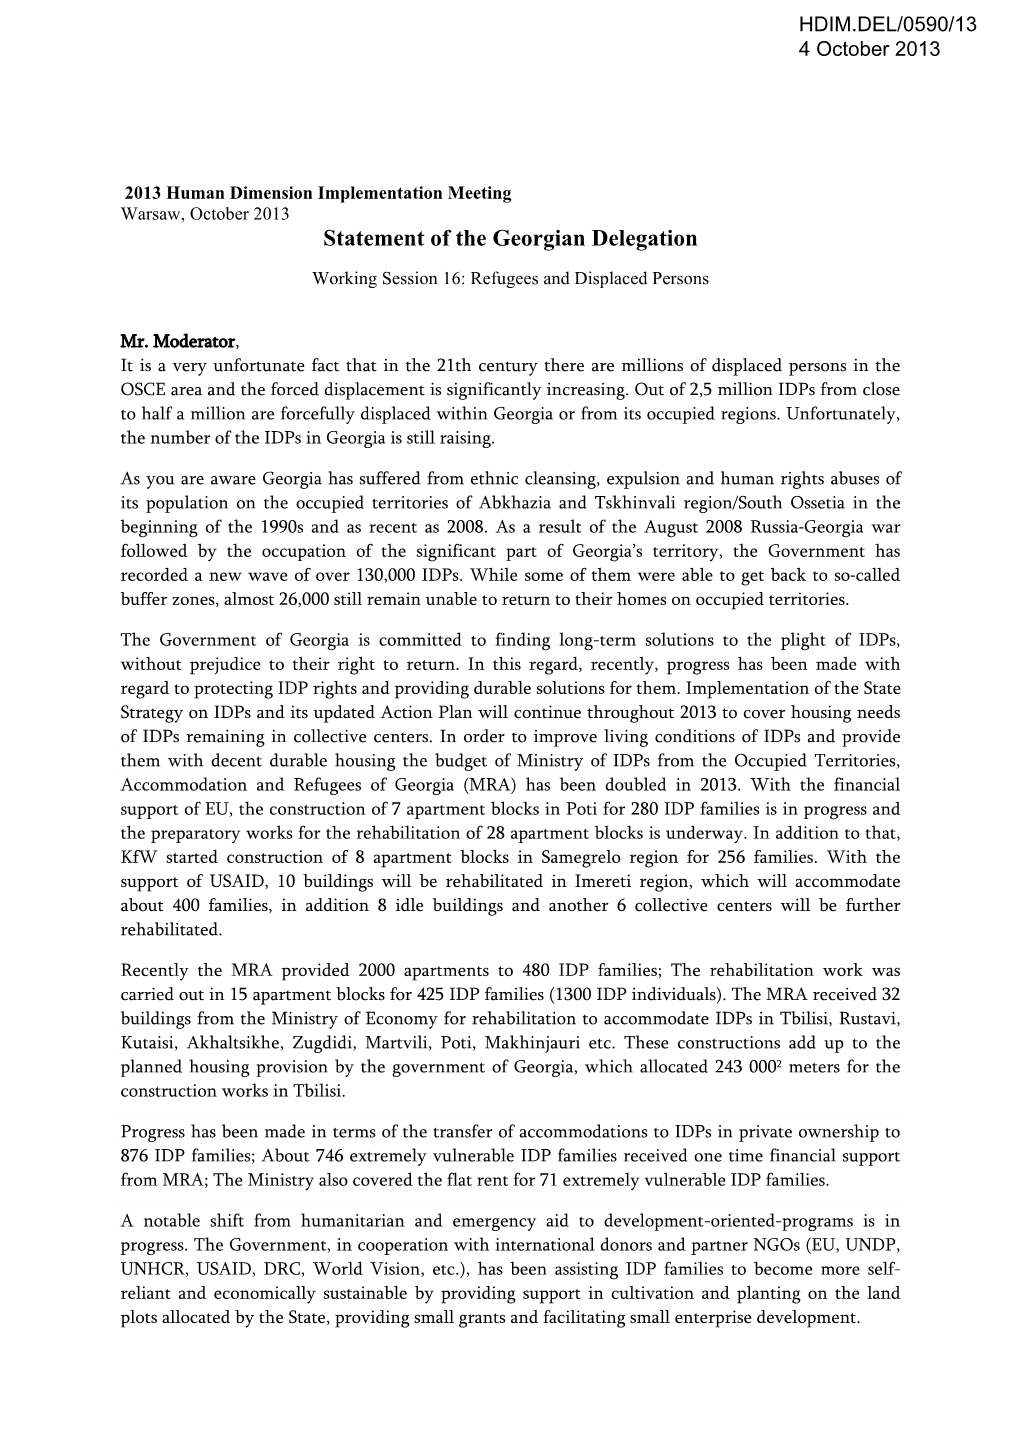 Statement of the Georgian Delegation